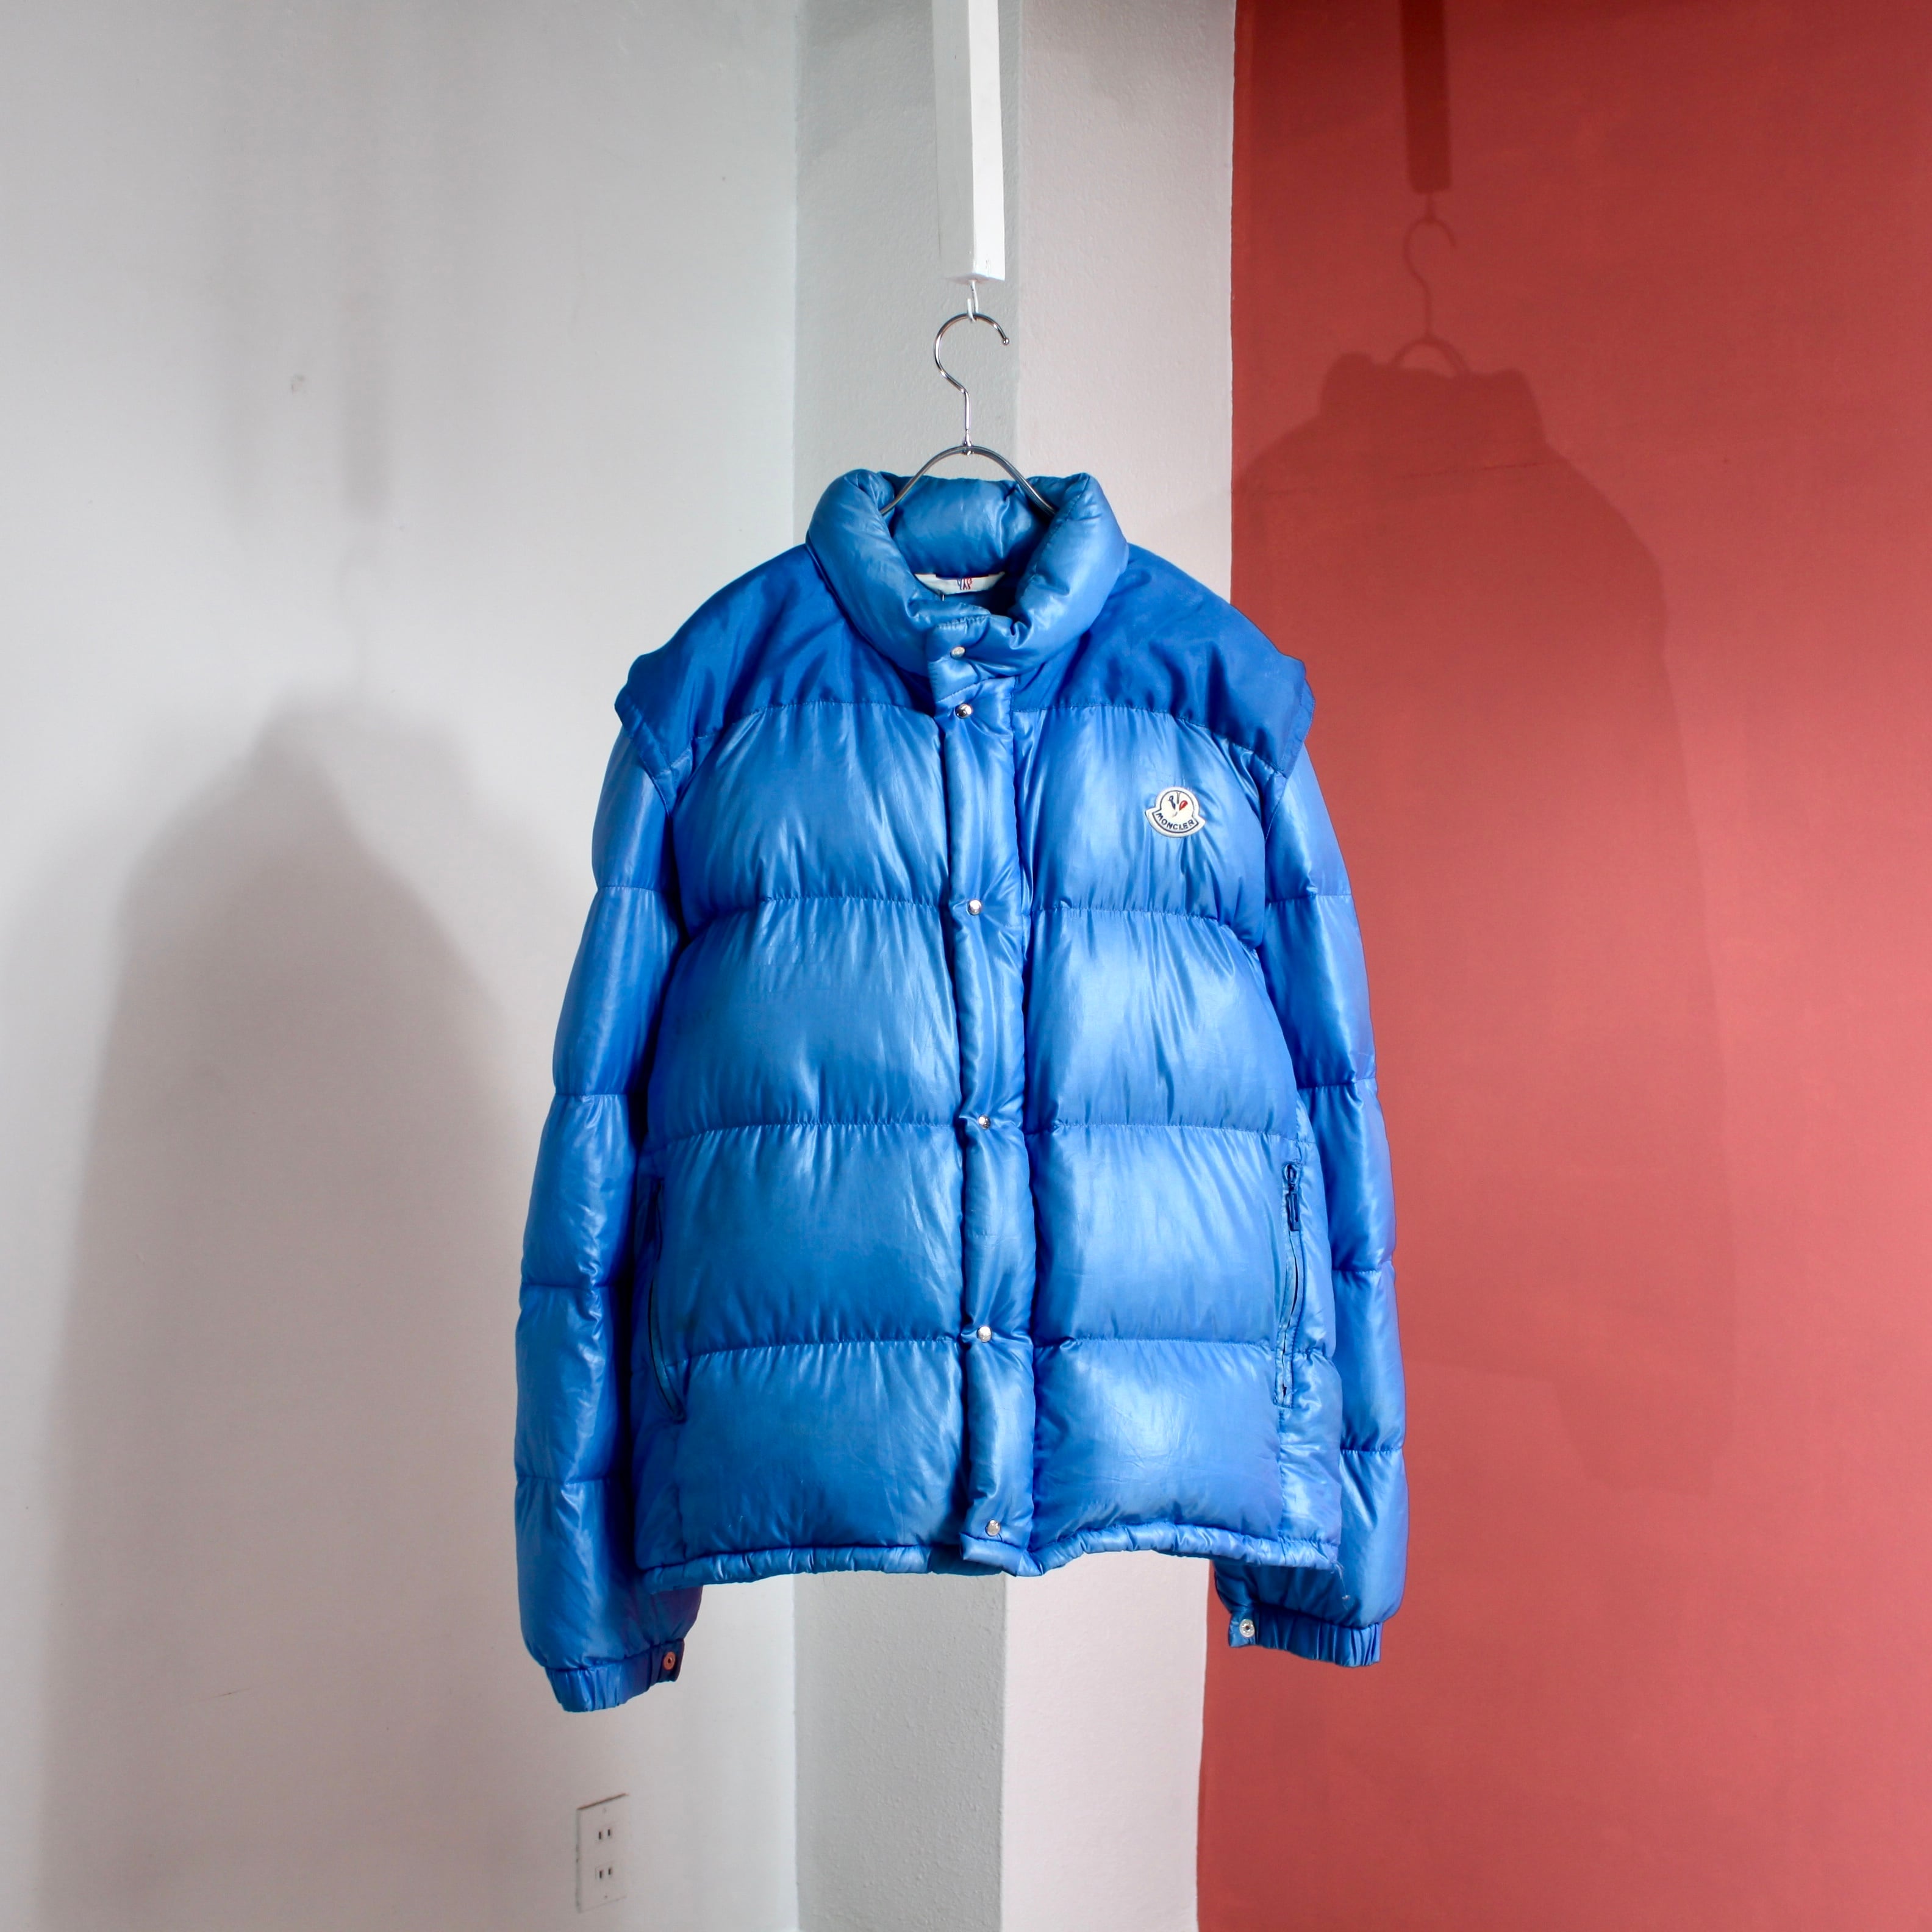 0580. 1980's Moncler Grenoble Down jacket with detachable arm made